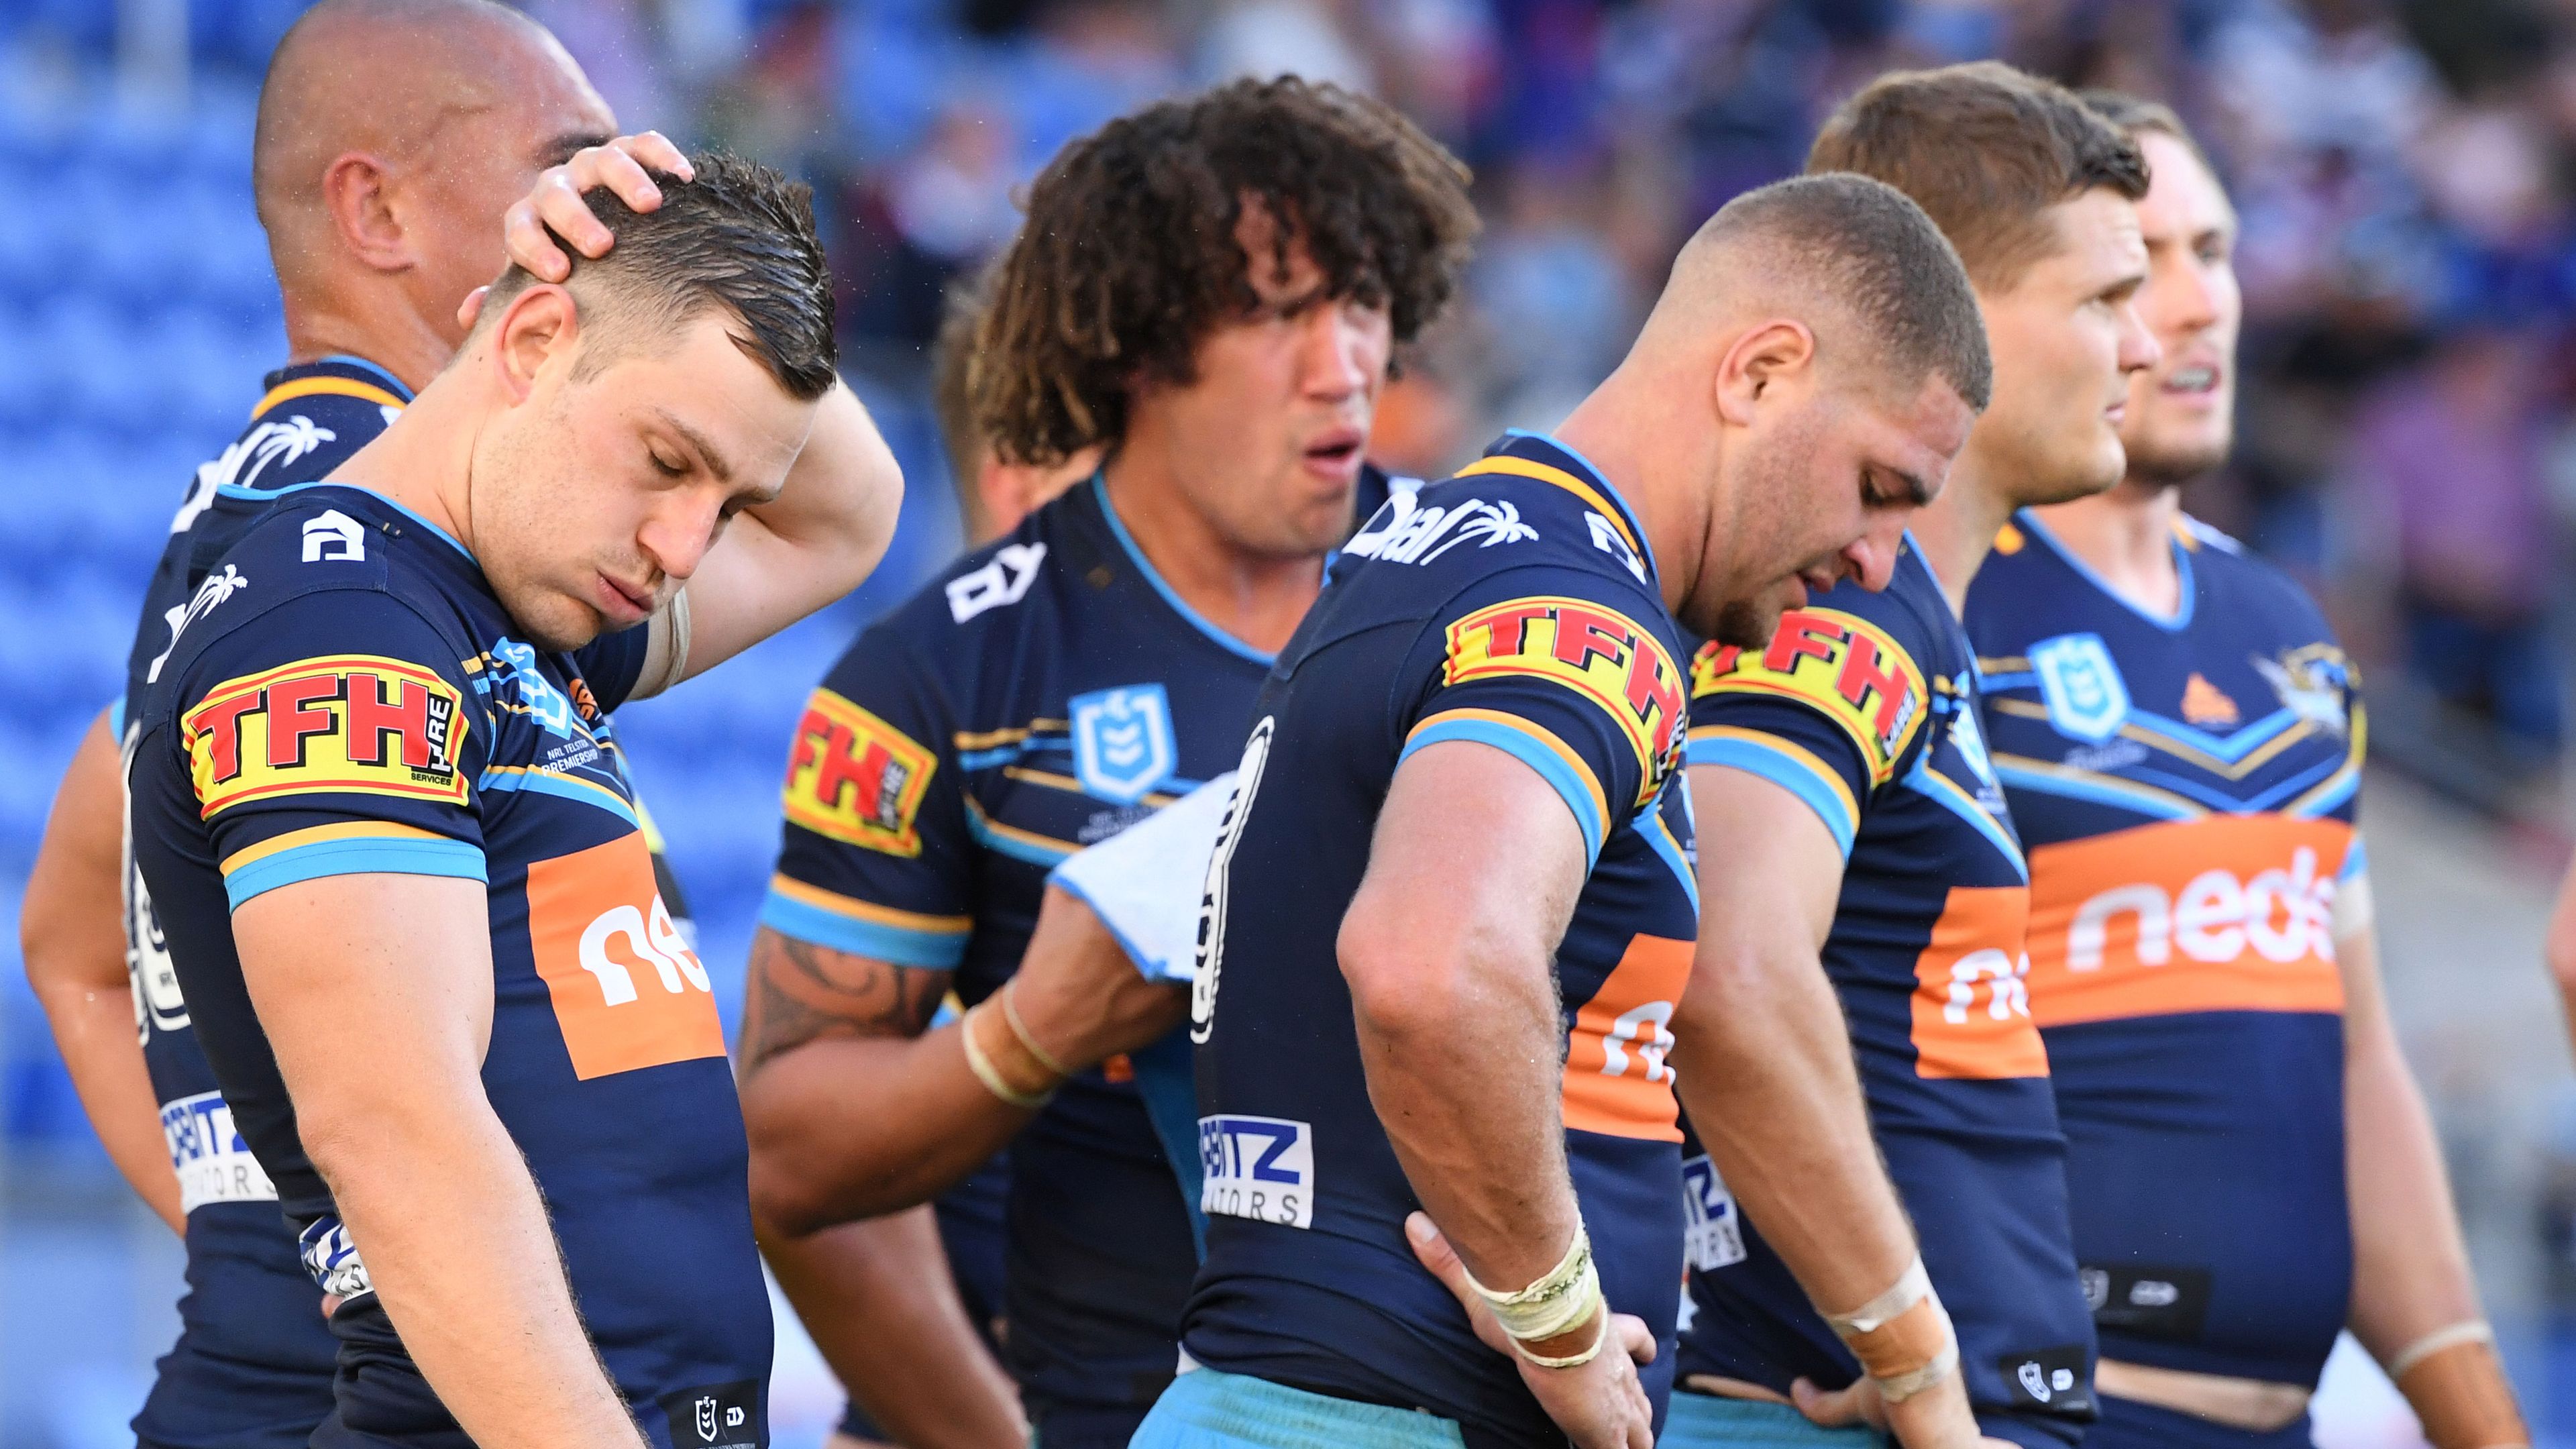 EXCLUSIVE: The 'brave' move that saved the Gold Coast Titans from disaster